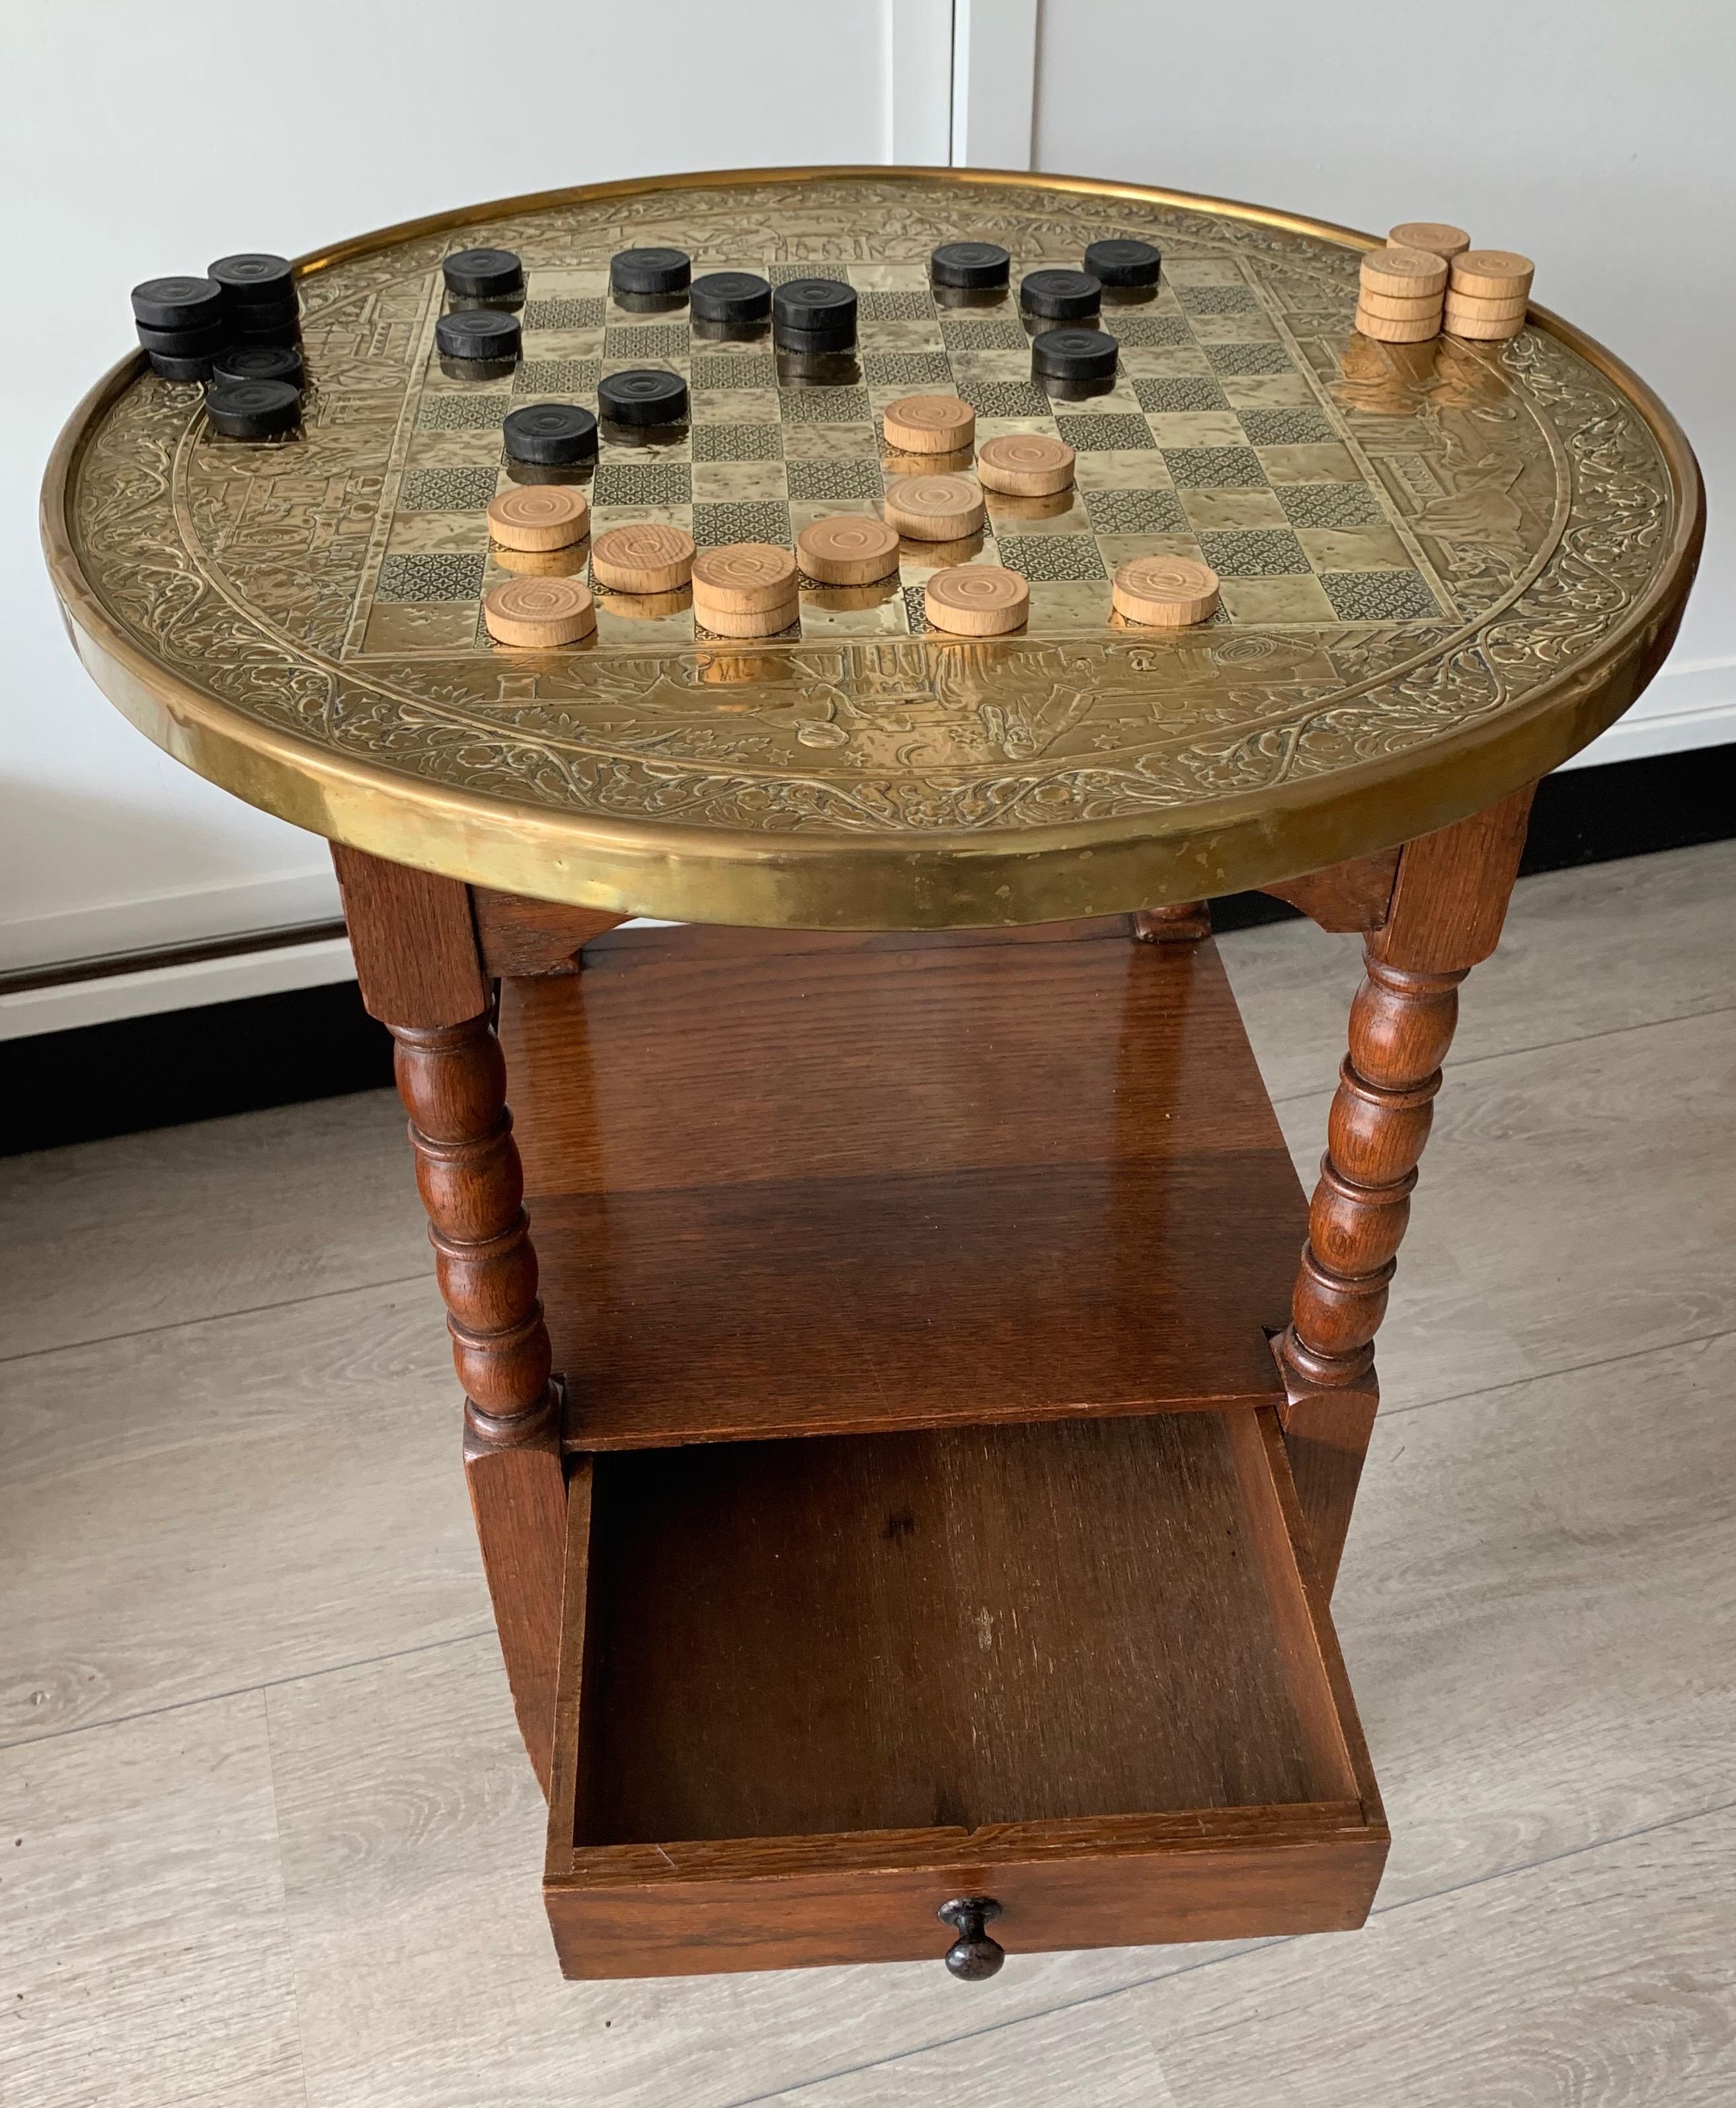 20th Century Early 1900s Dutch Arts & Crafts Checkers/Draughts Table with Embossed Brass Top